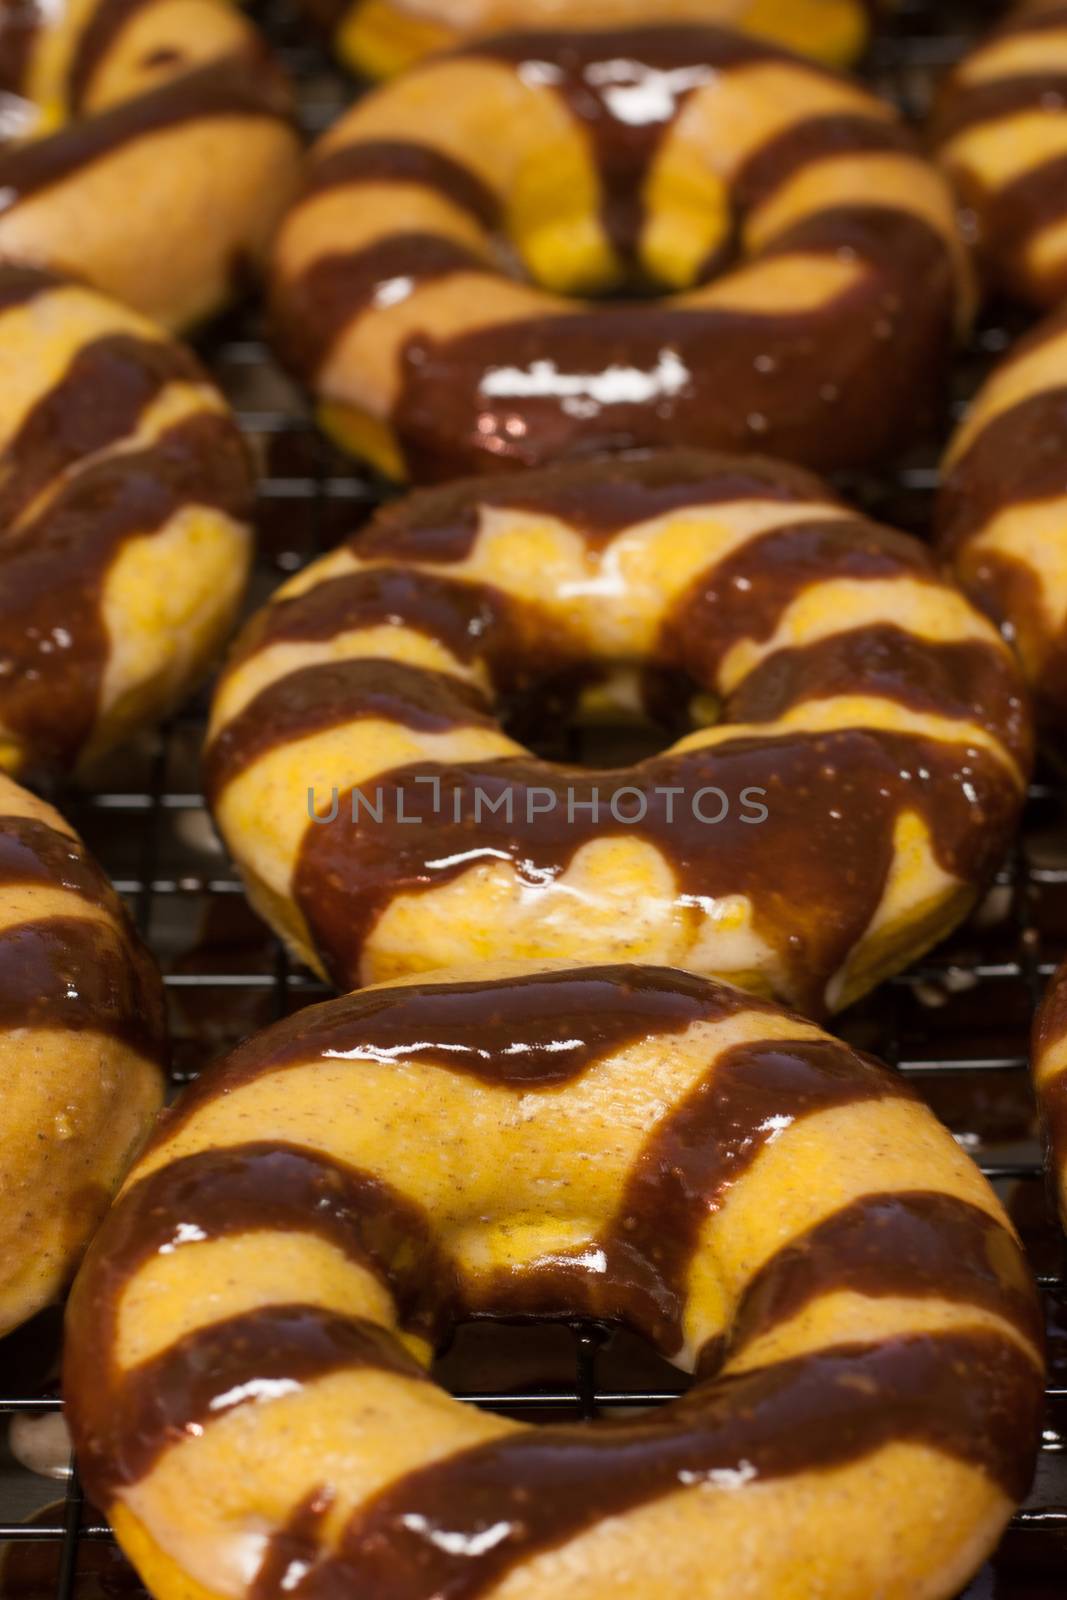 Pumpkin doughnuts with spiced glaze and choclate drizzle over the top.